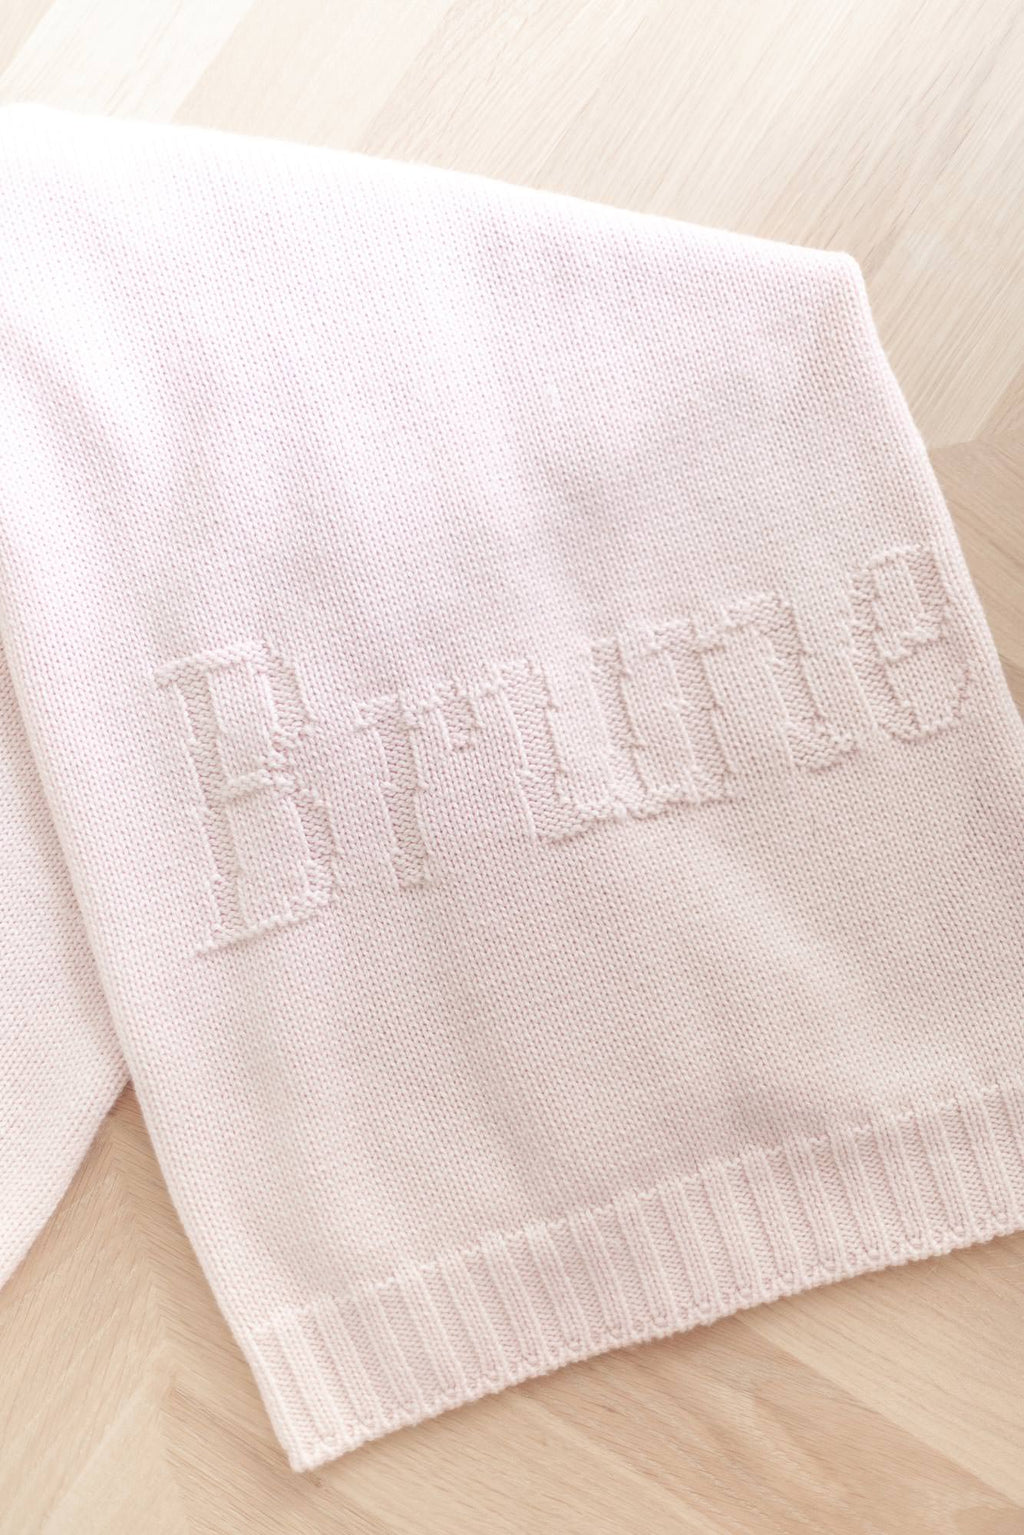 Blanket Personalized - Wool Pale pink